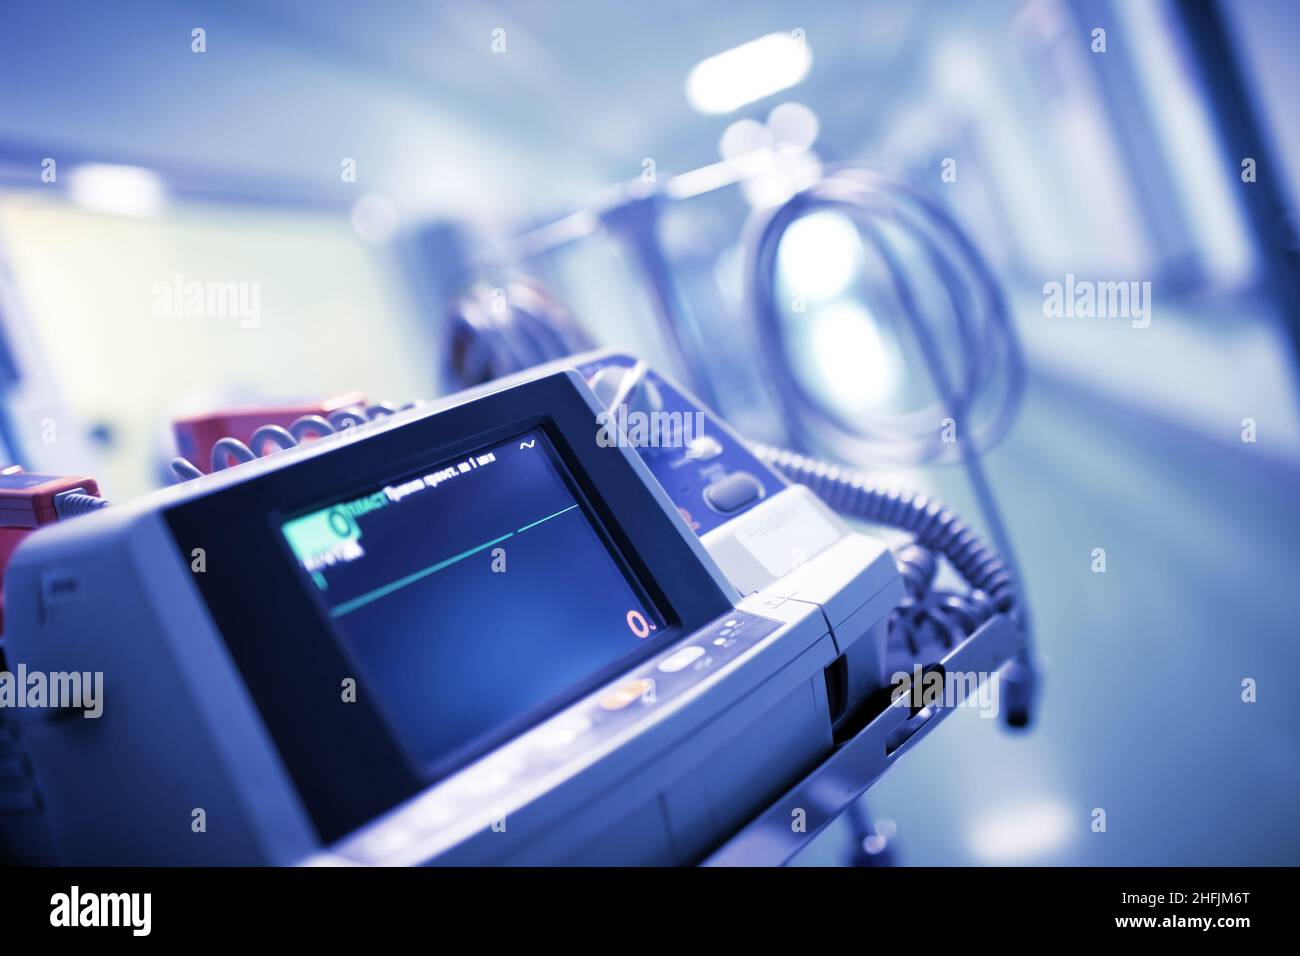 Straight line with no ECG waves on the monitor in the hospital department, concept of patient clinical death. Stock Photo